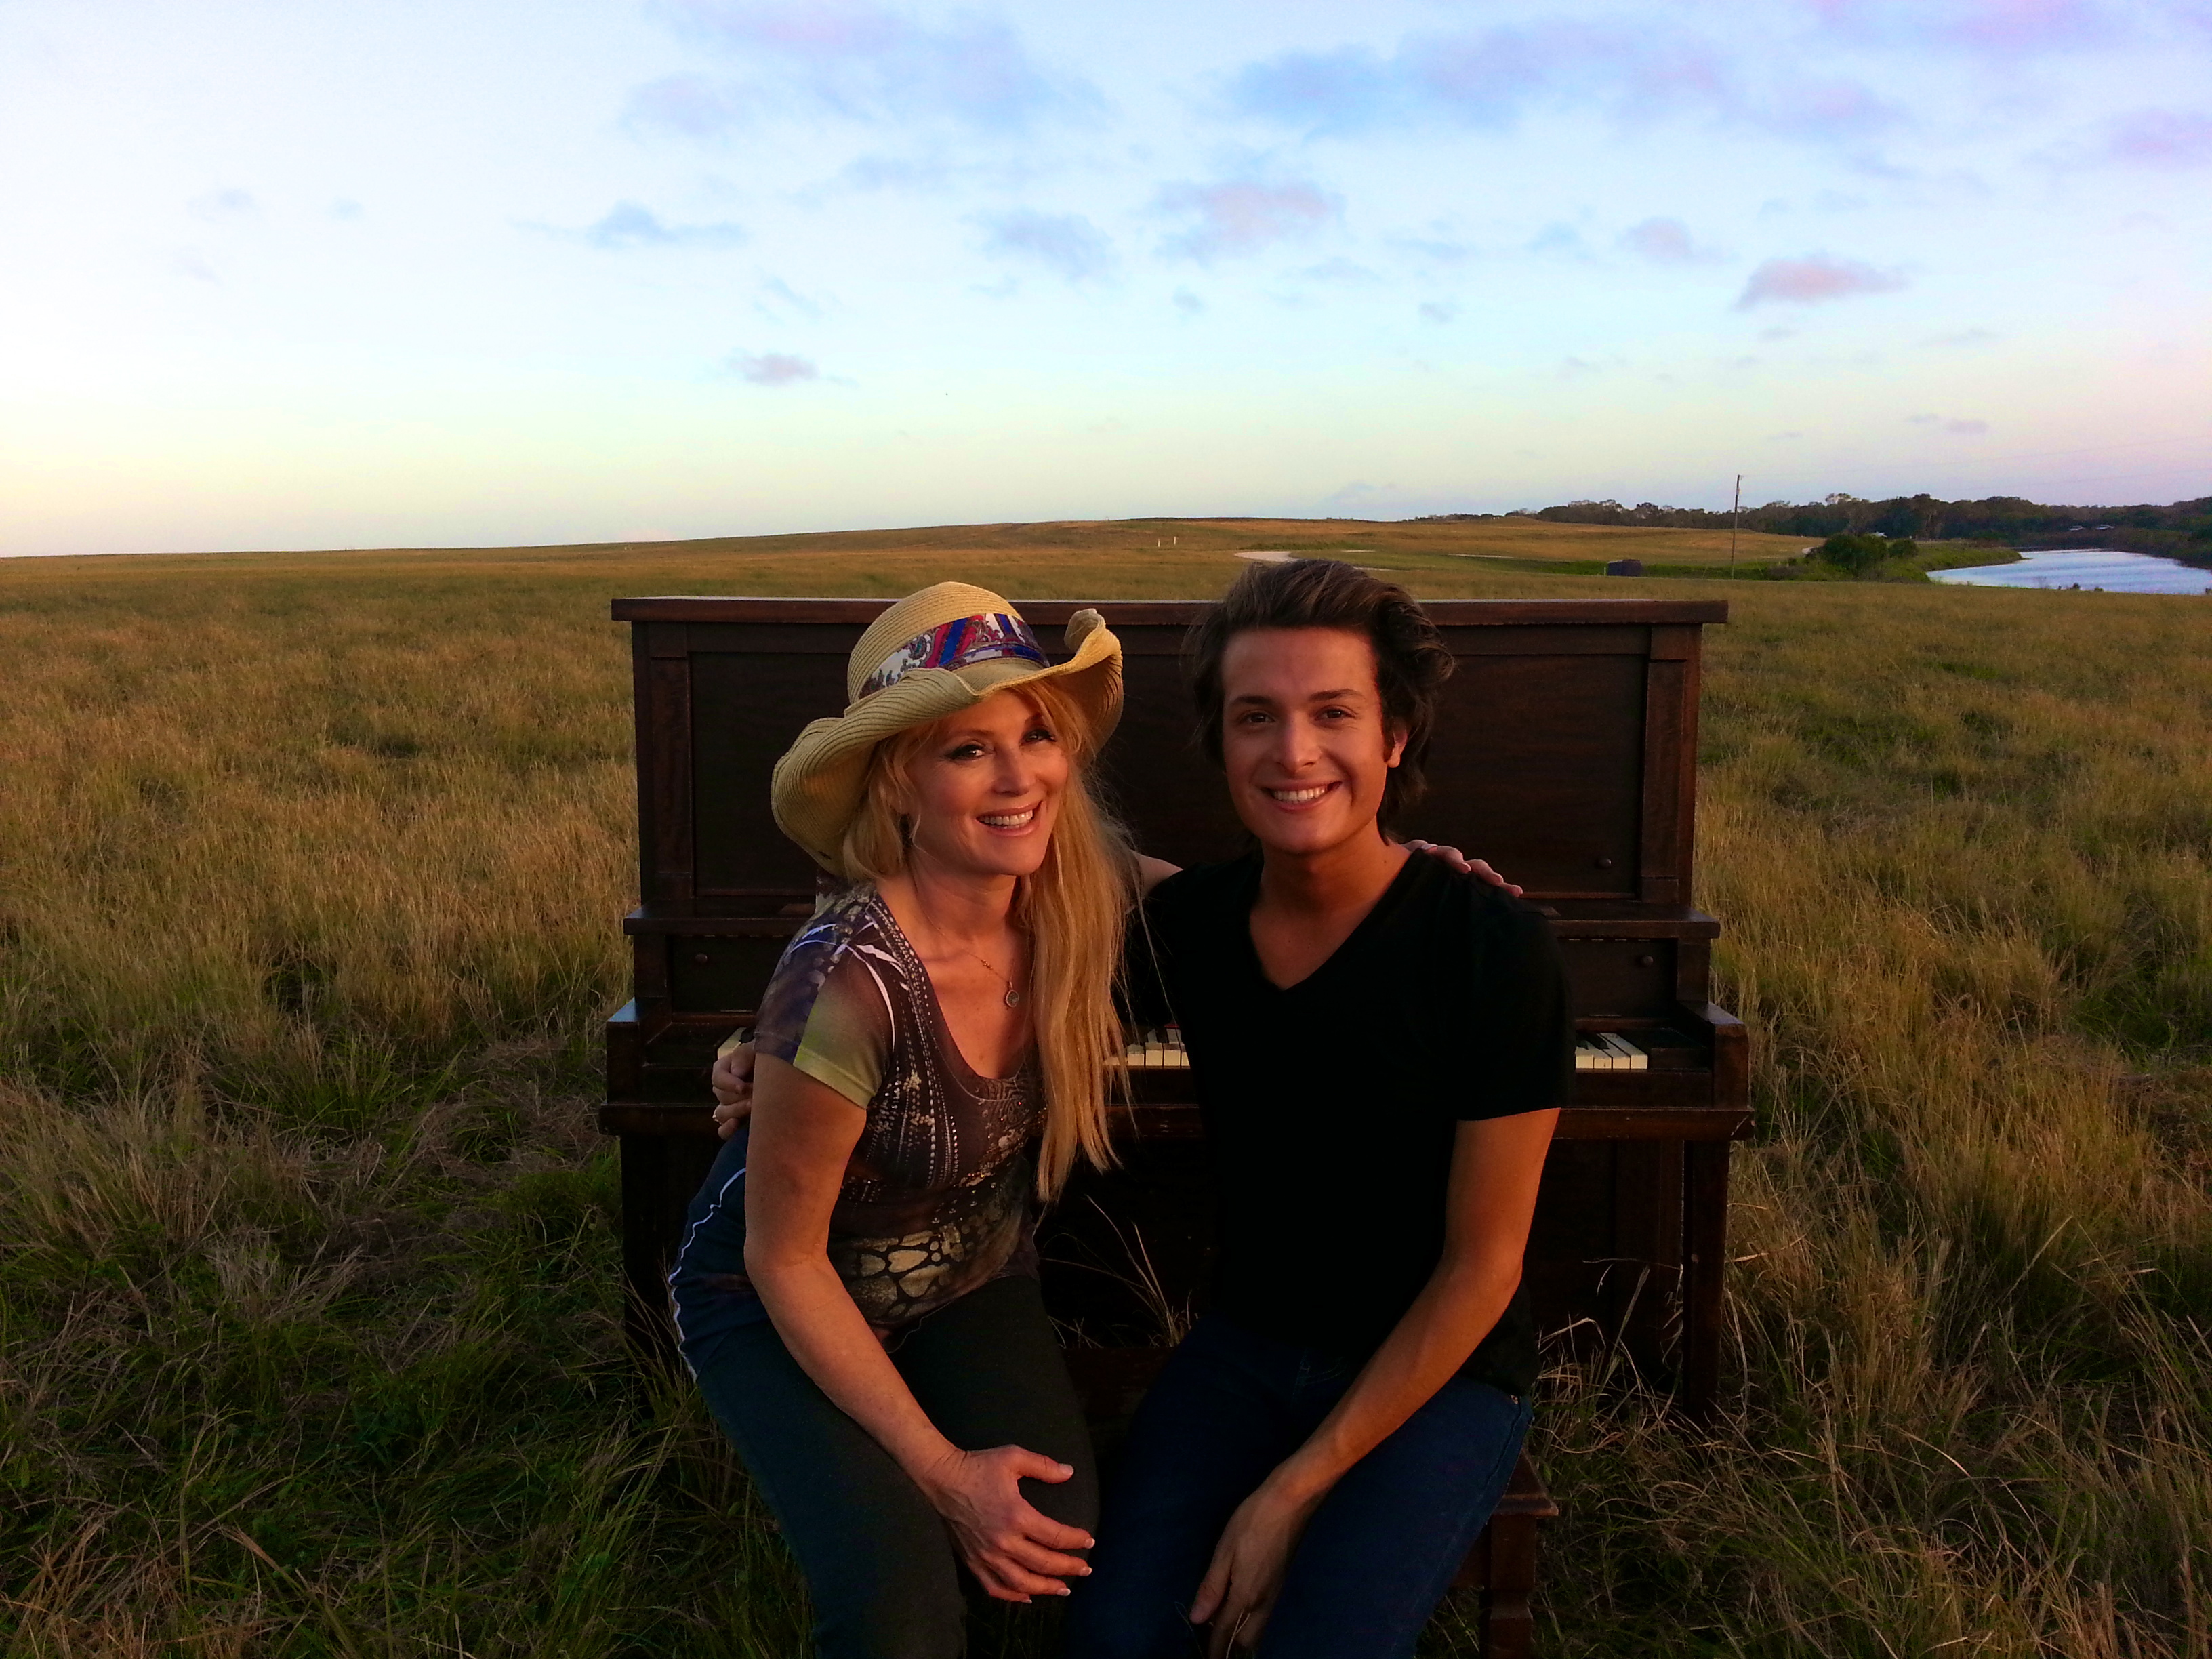 With Daniel Landers at shoot of his music video, Love Me Tonight https://www.youtube.com/watch?v=FjDz68Tazy4